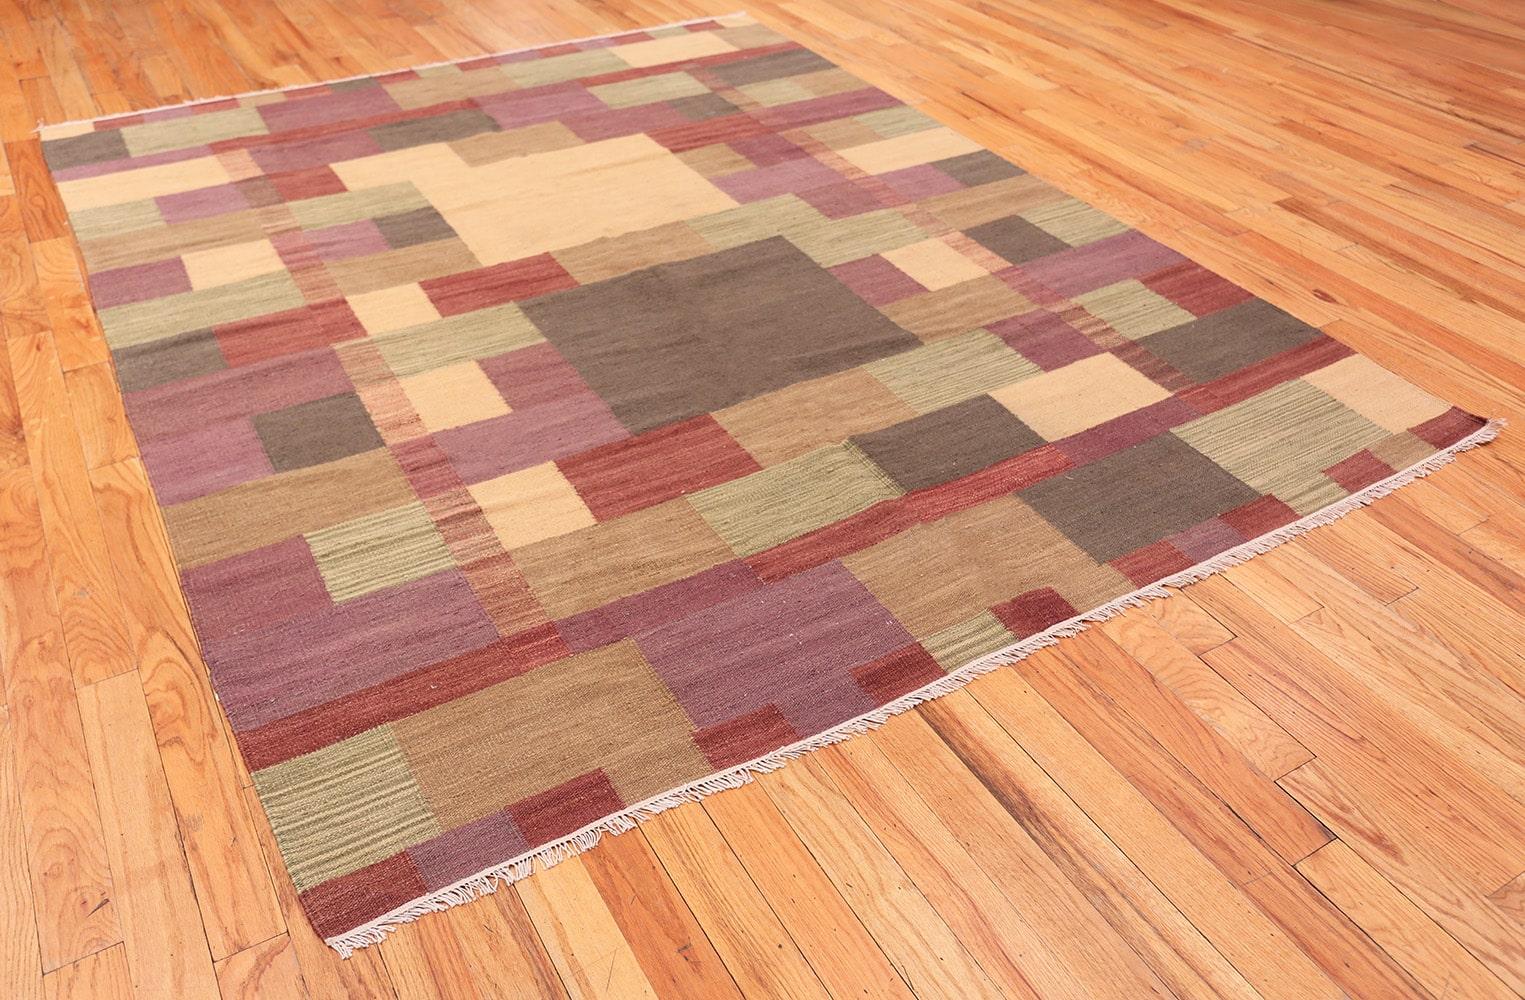 Hand-Woven Swedish Inspired Modern Kilim Rug. Size: 7 ft x 9 ft 2 in (2.13 m x 2.79 m)